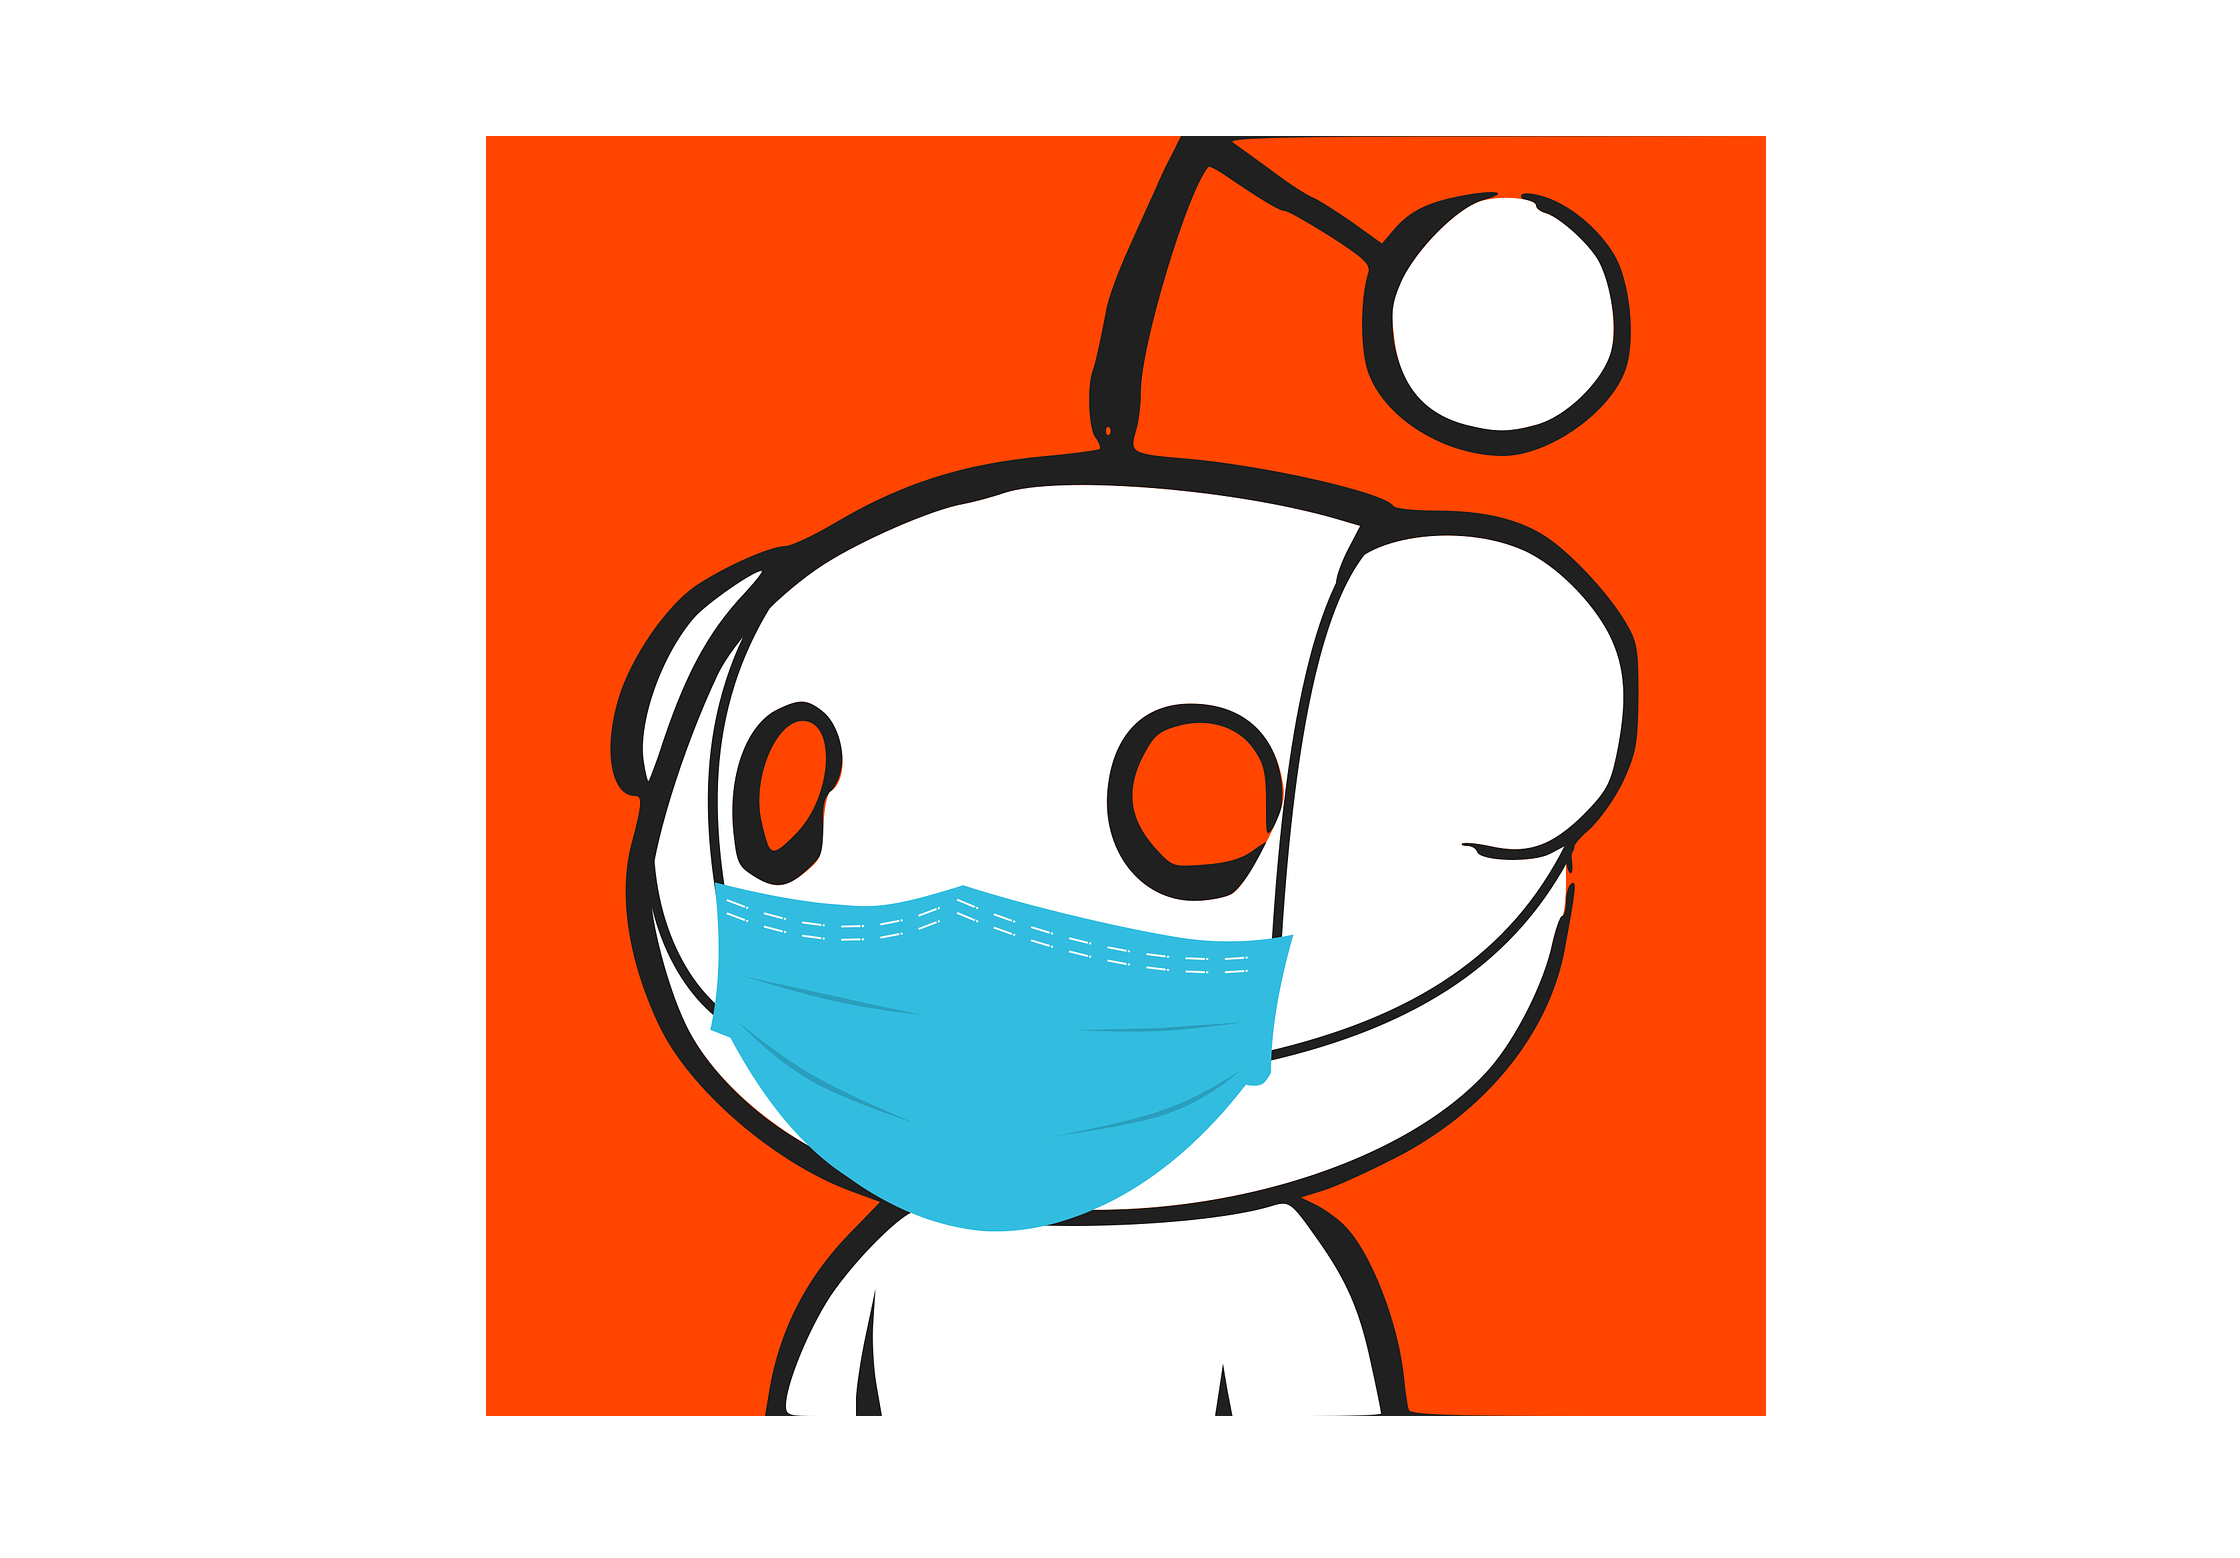 Cover image for  article: Uncovering Reddit's Underbelly and Why Advertisers Should be Wary